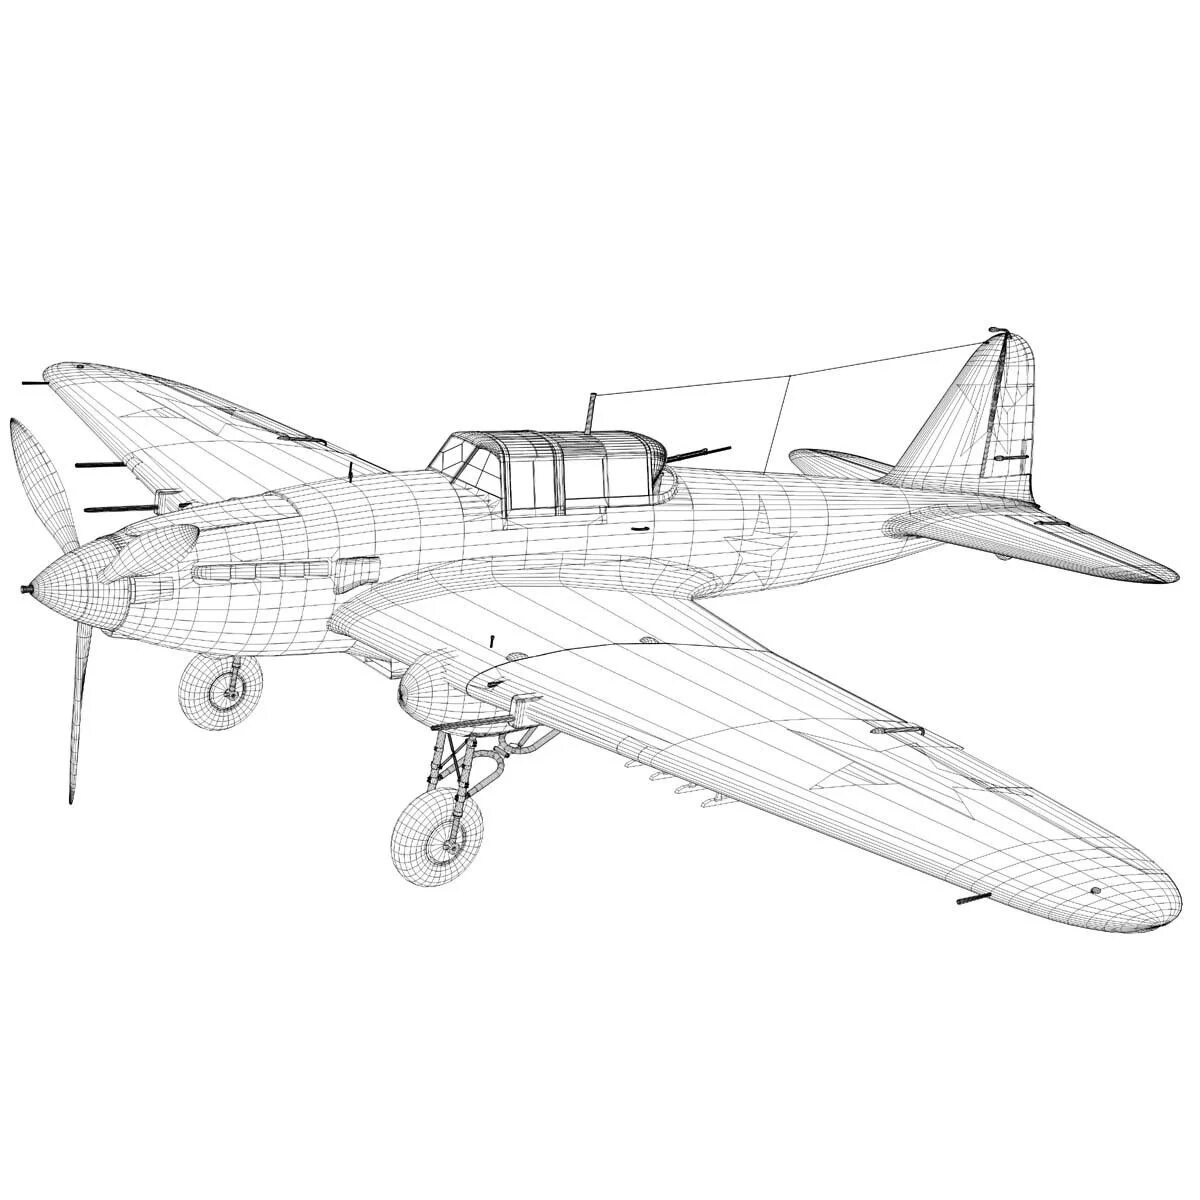 Silt 2 luxury plane coloring page